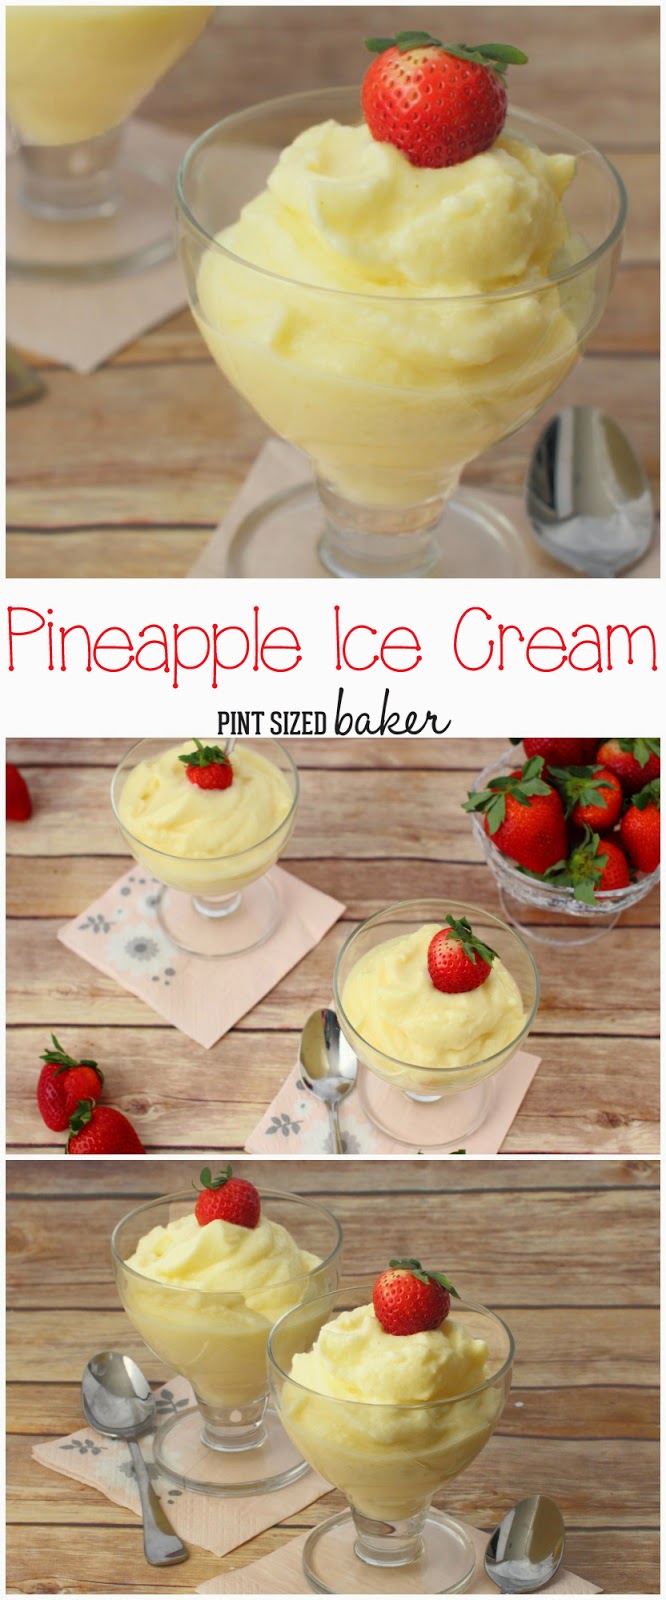 Pineapple Sherbet is smooth and creamy and comes together with two ingredients and five minutes. It's the perfect summer snack!